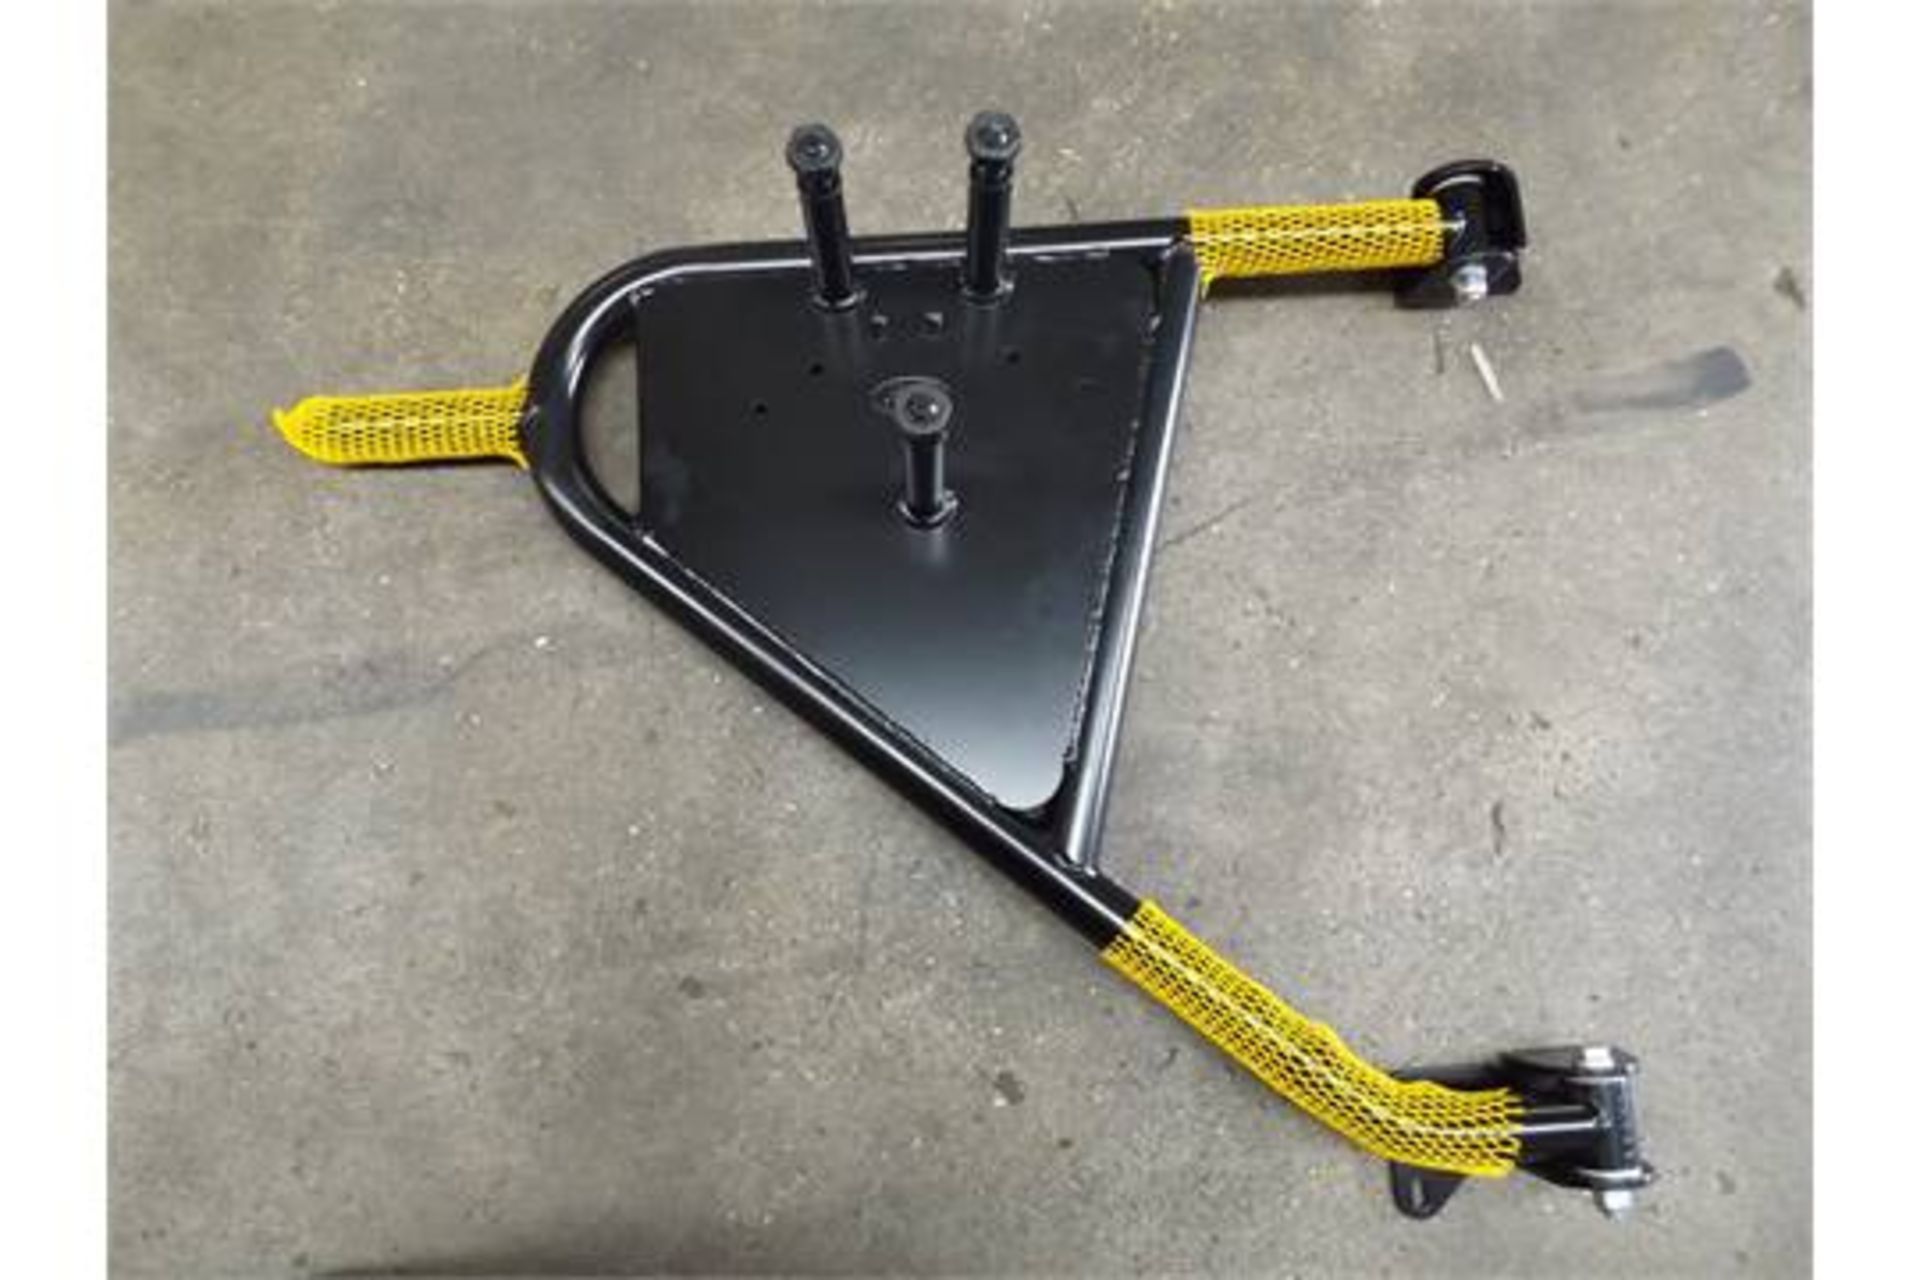 Approx 30 x Land Rover Defender Swing Out Spare Wheel Carrier Kits P/No VPLDR0129 - Image 3 of 11